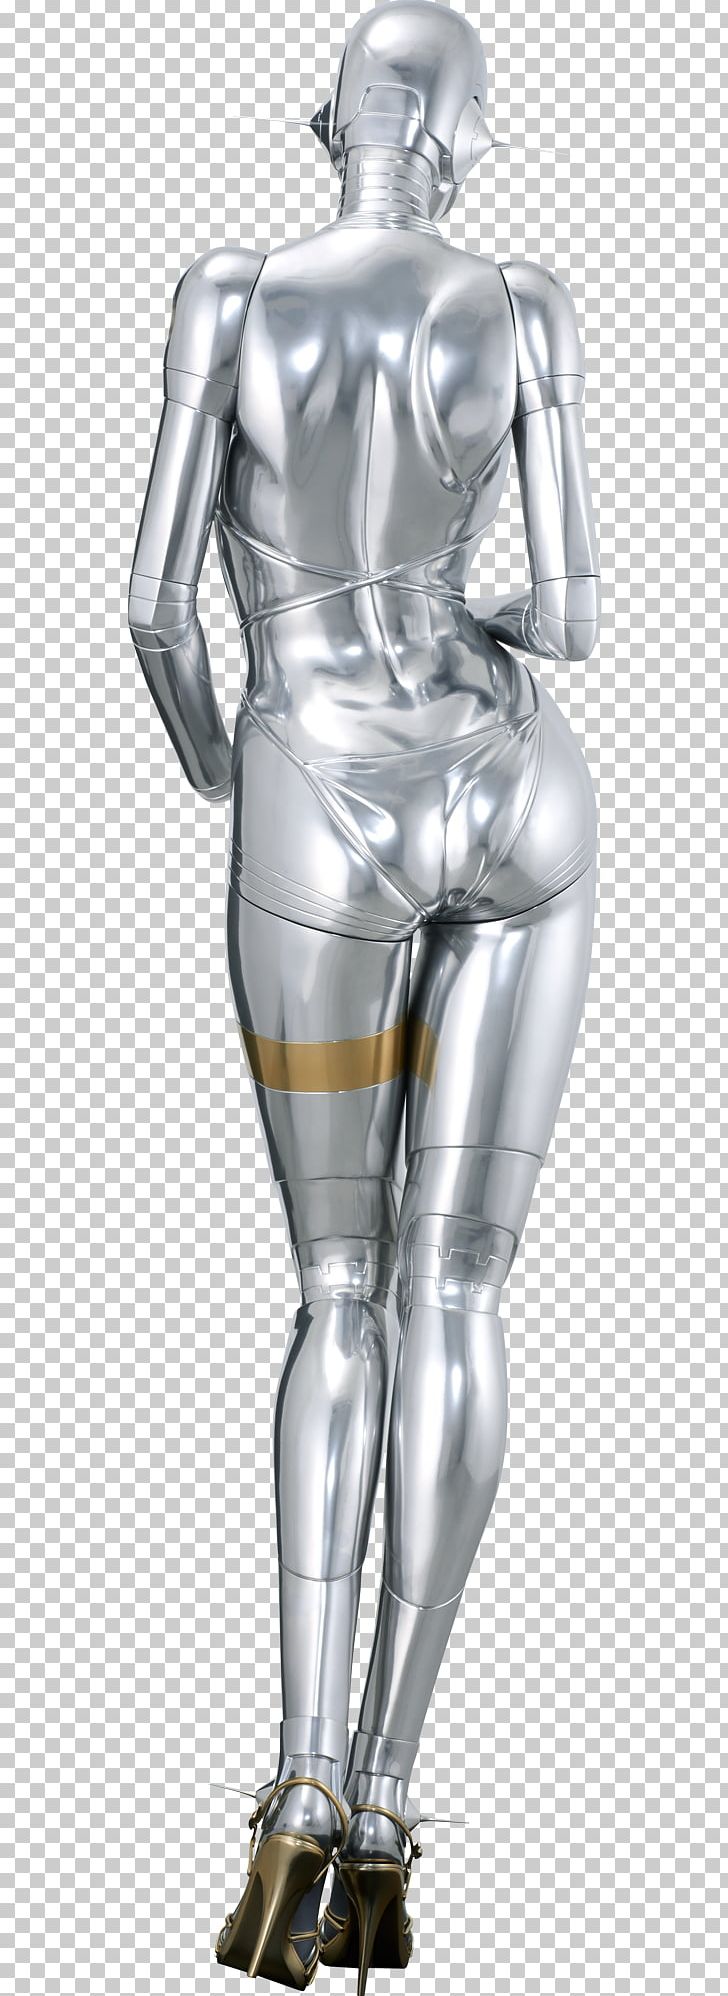 NANZUKA United States Sexy Robot Erotic Art PNG, Clipart, Arm, Armour, Art, Art Exhibition, Classical Sculpture Free PNG Download